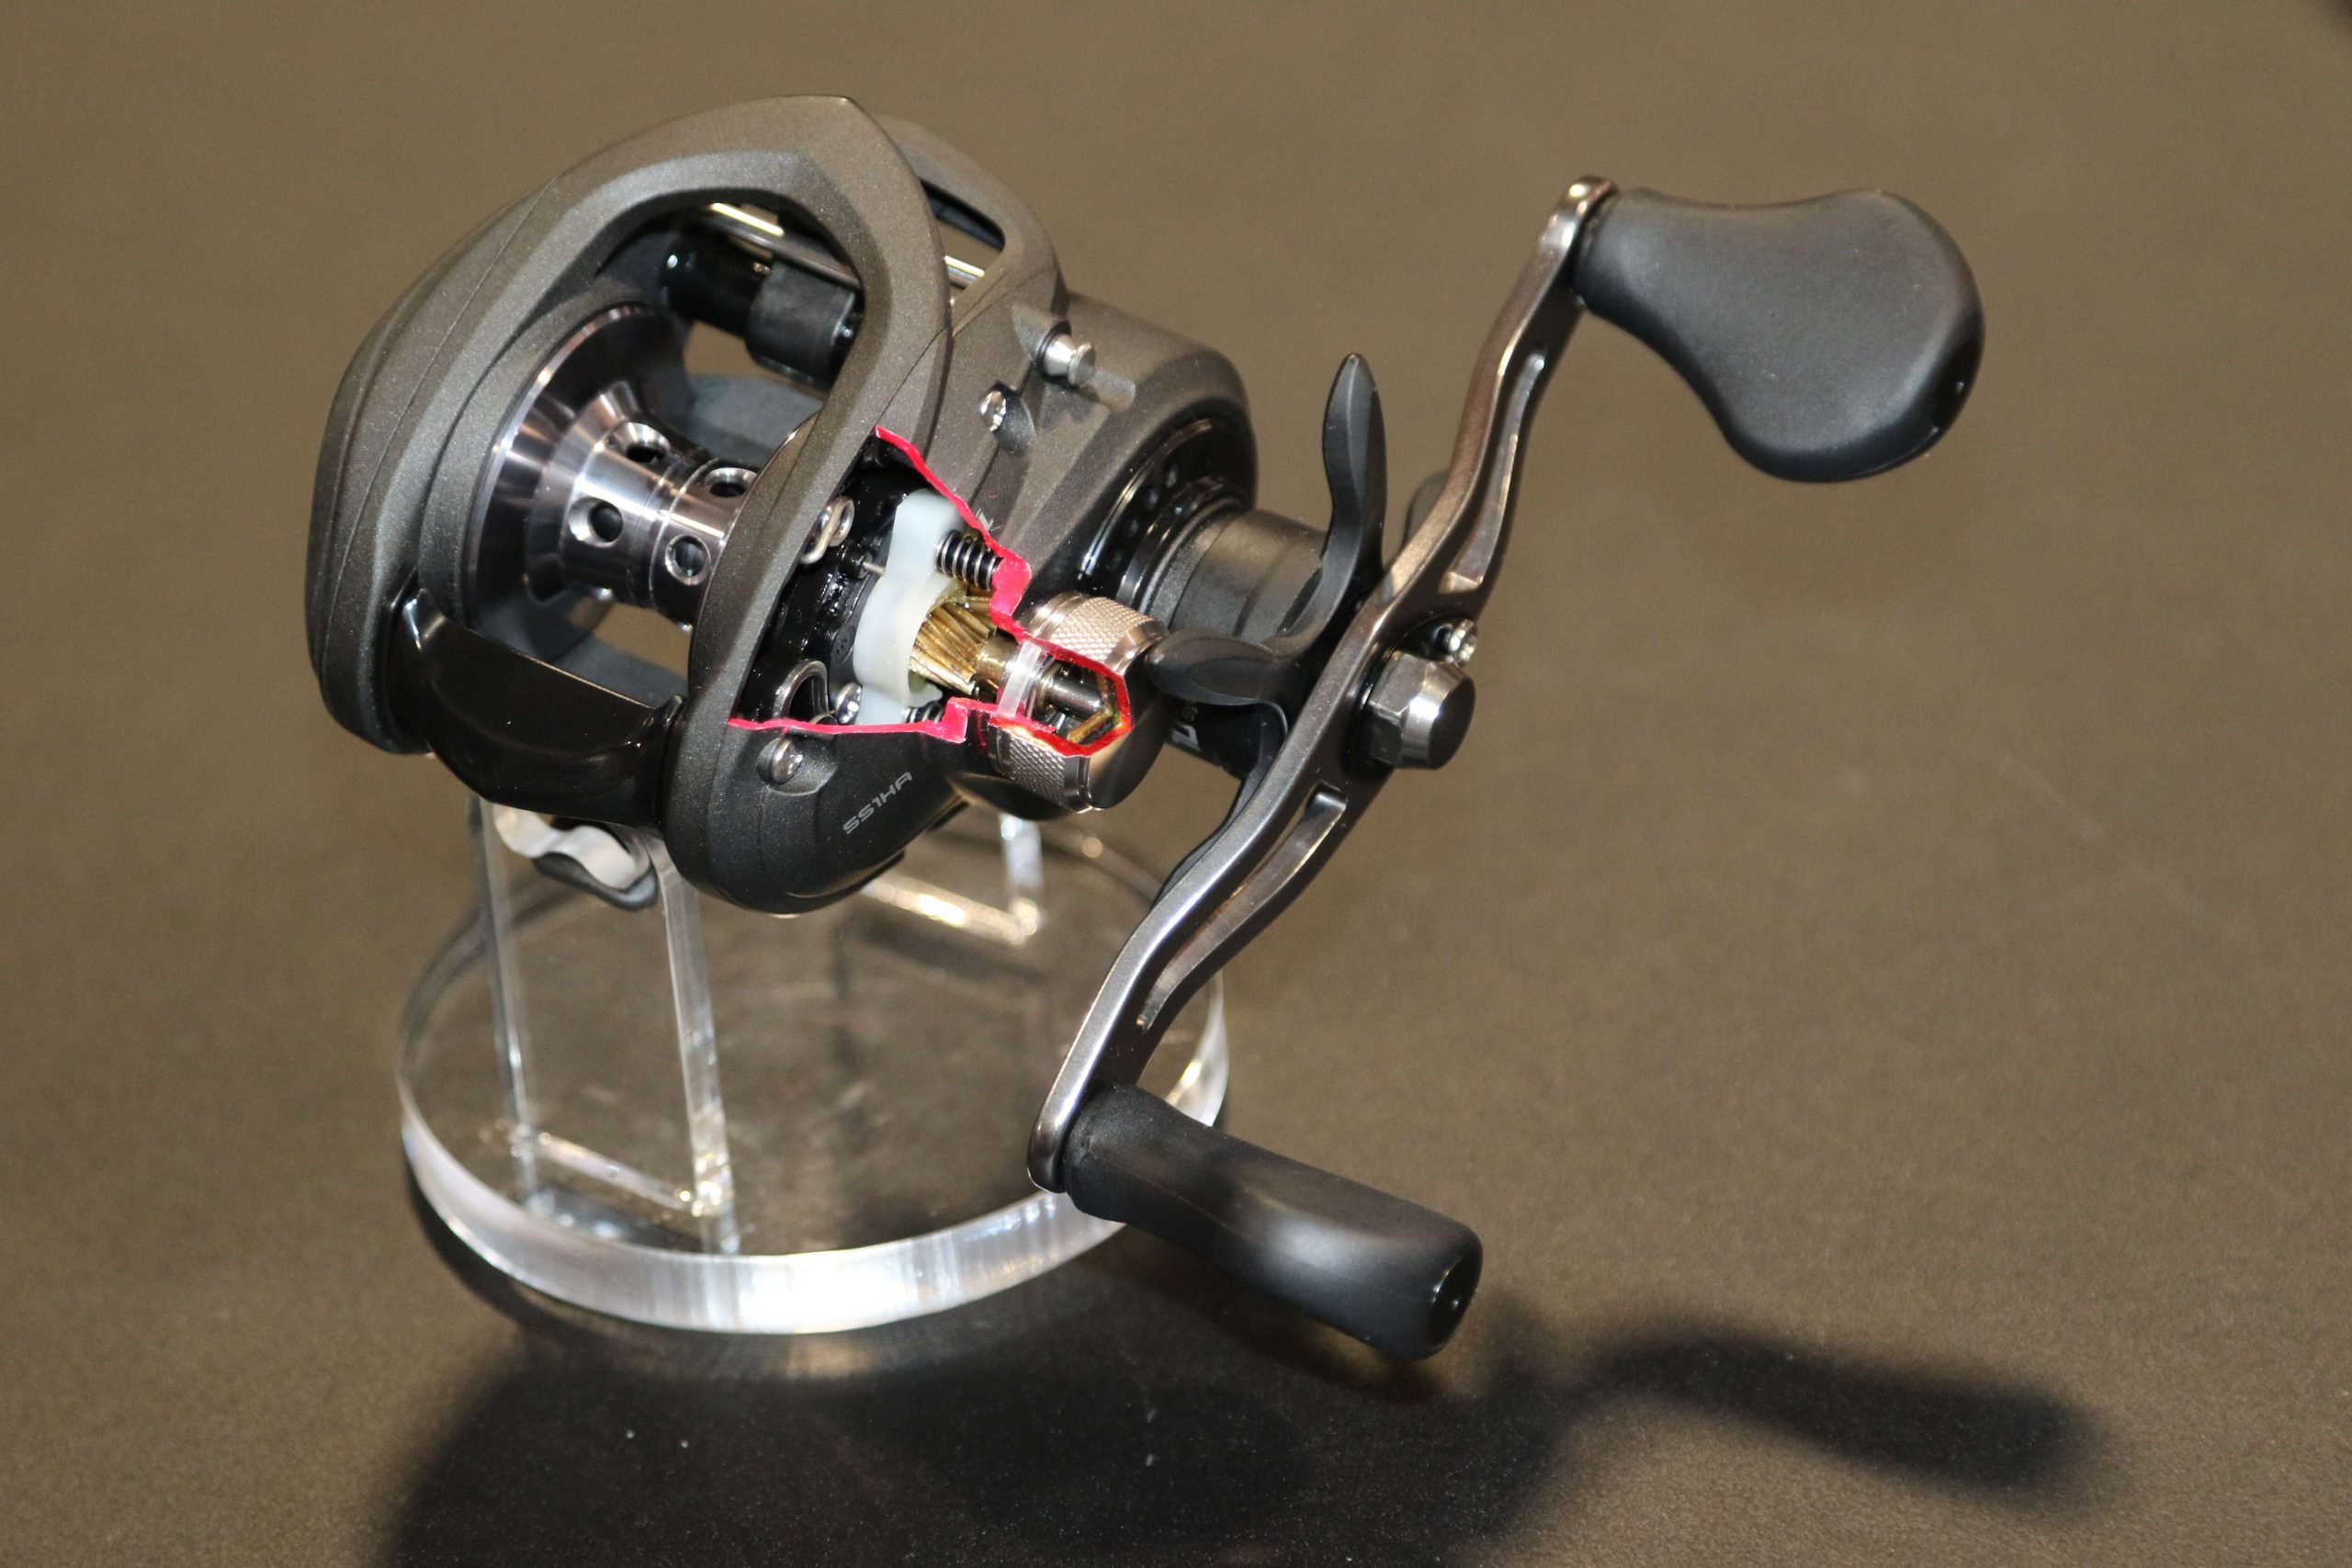 The new Lewâs P2 Super Pinion design is available in the Tournament Pro and Speed Spool SS reels.